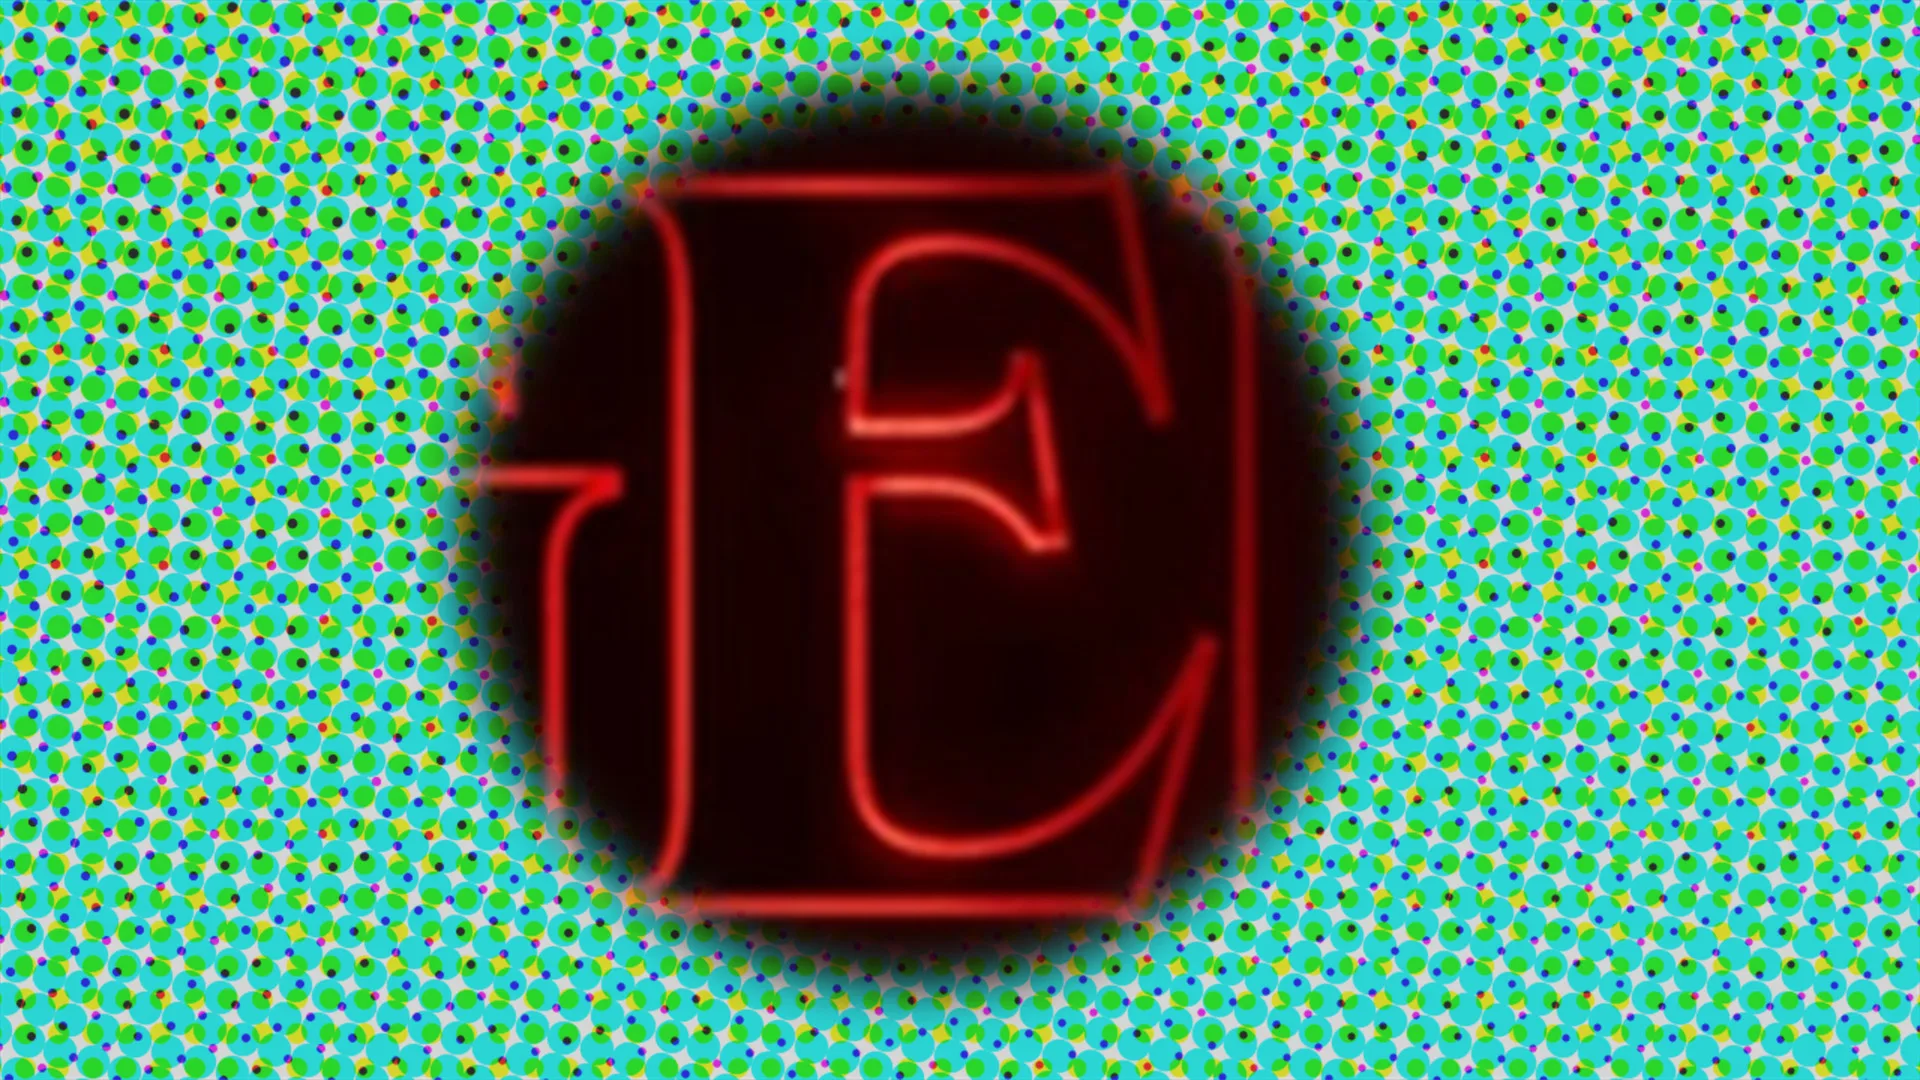 Another spookier red neon 'E'